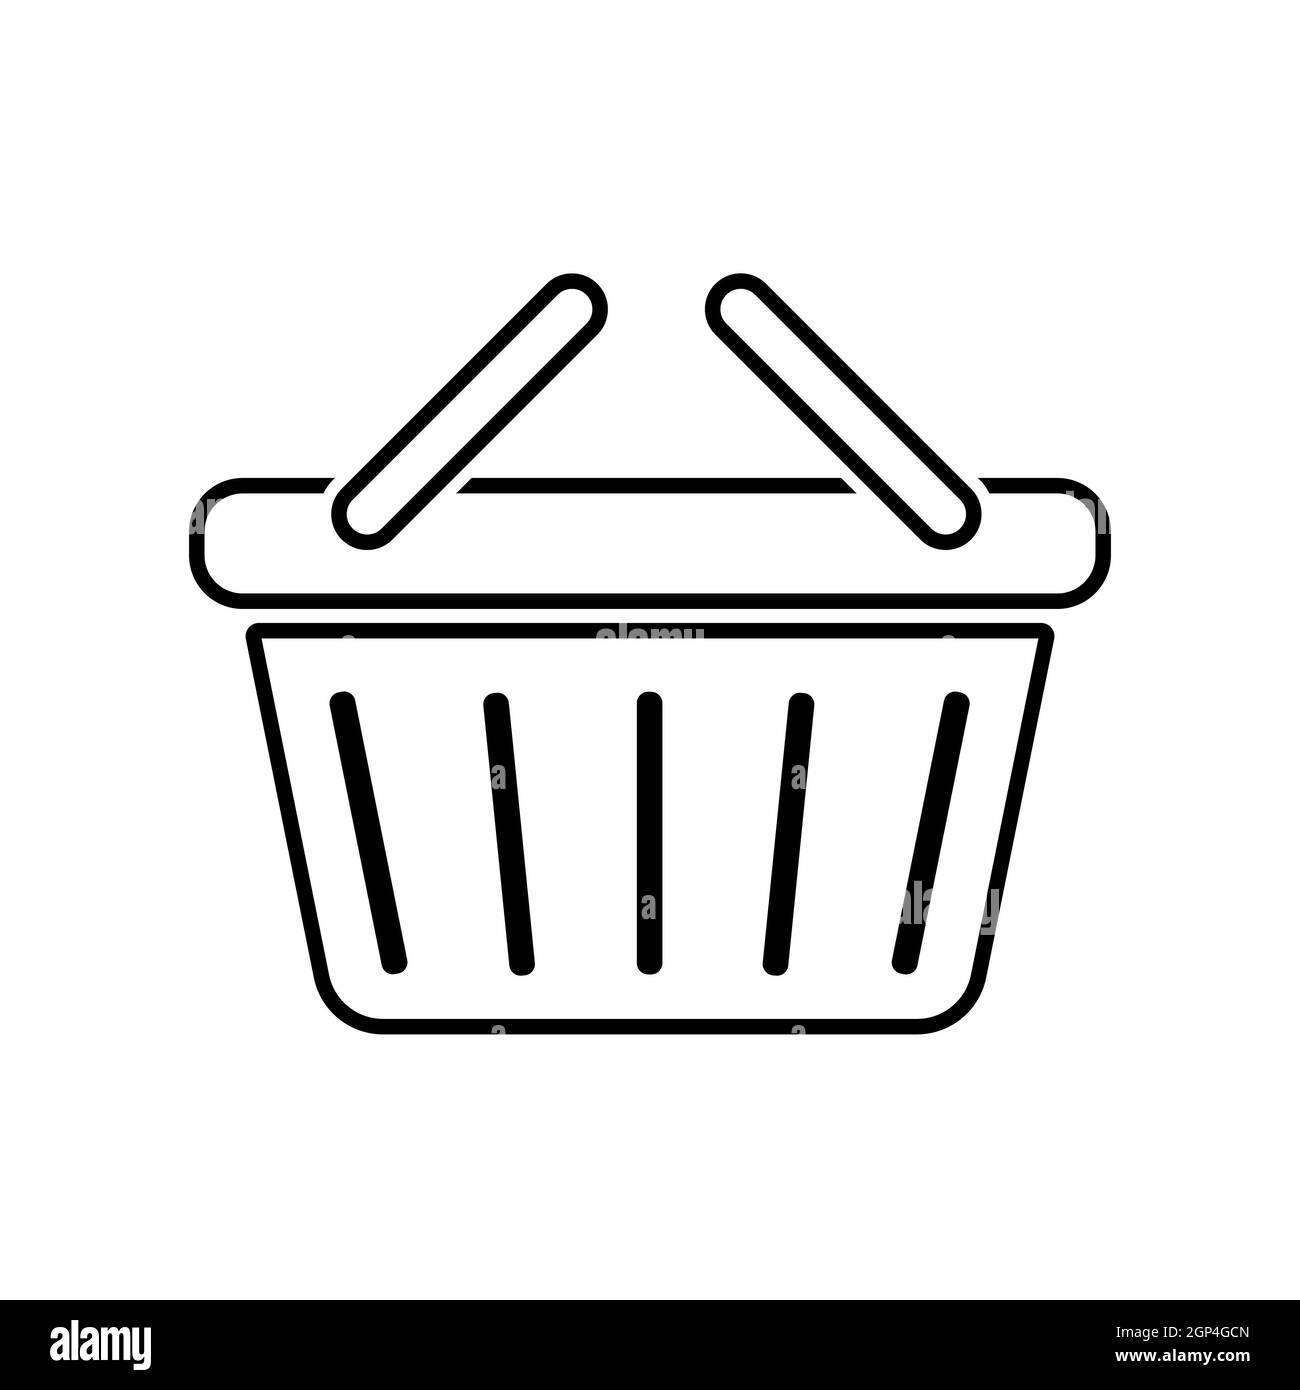 Abstract shopping cart for groceries from the supermarket - Vector illustration Stock Photo